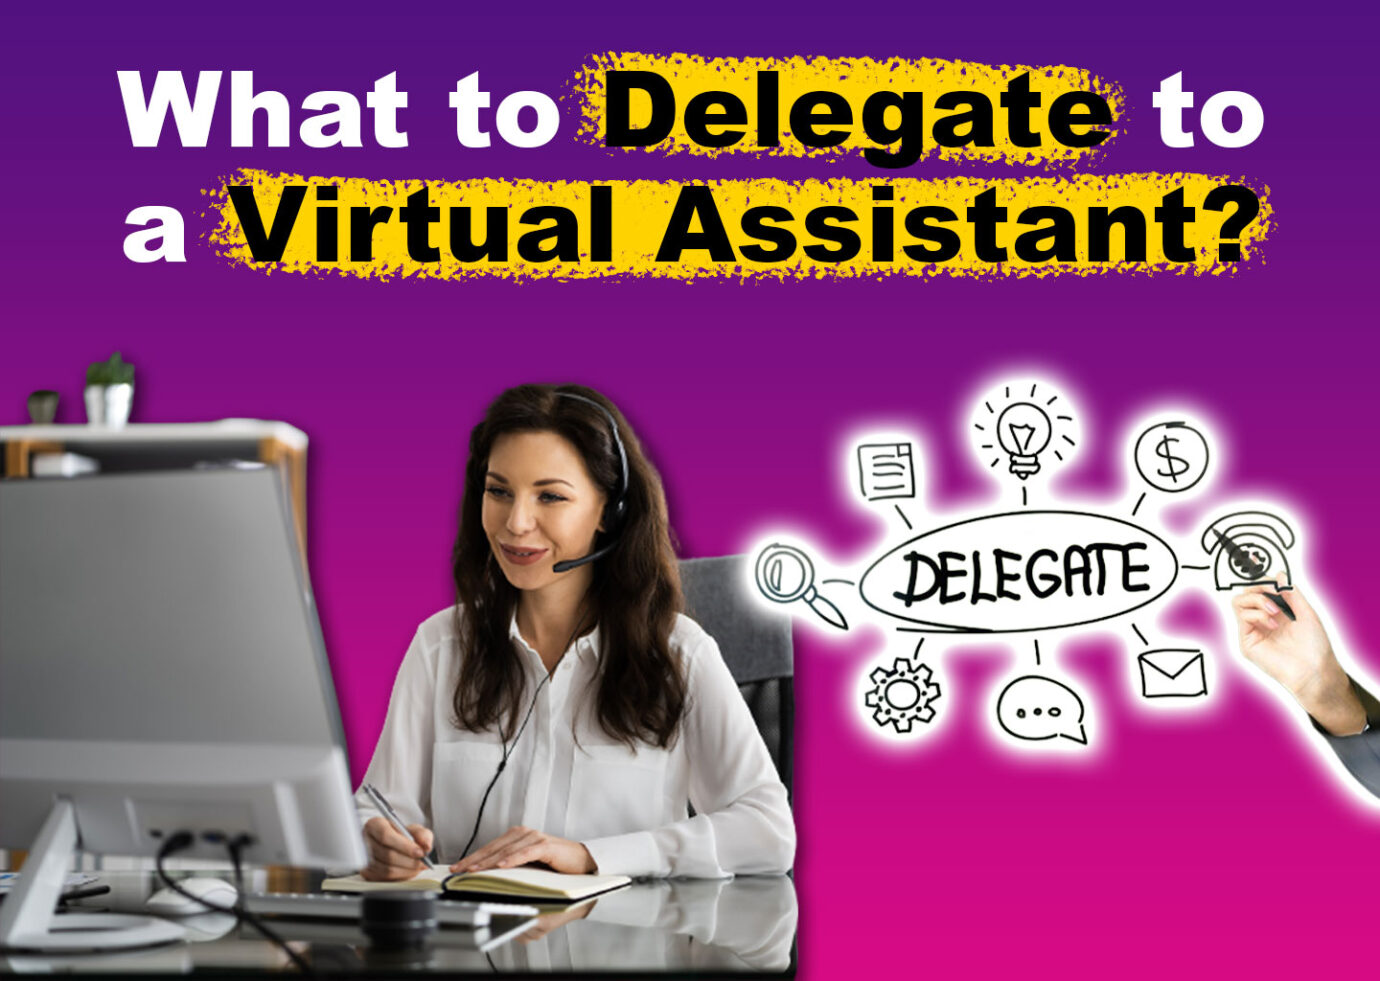 What to Delegate to a Virtual Assistant